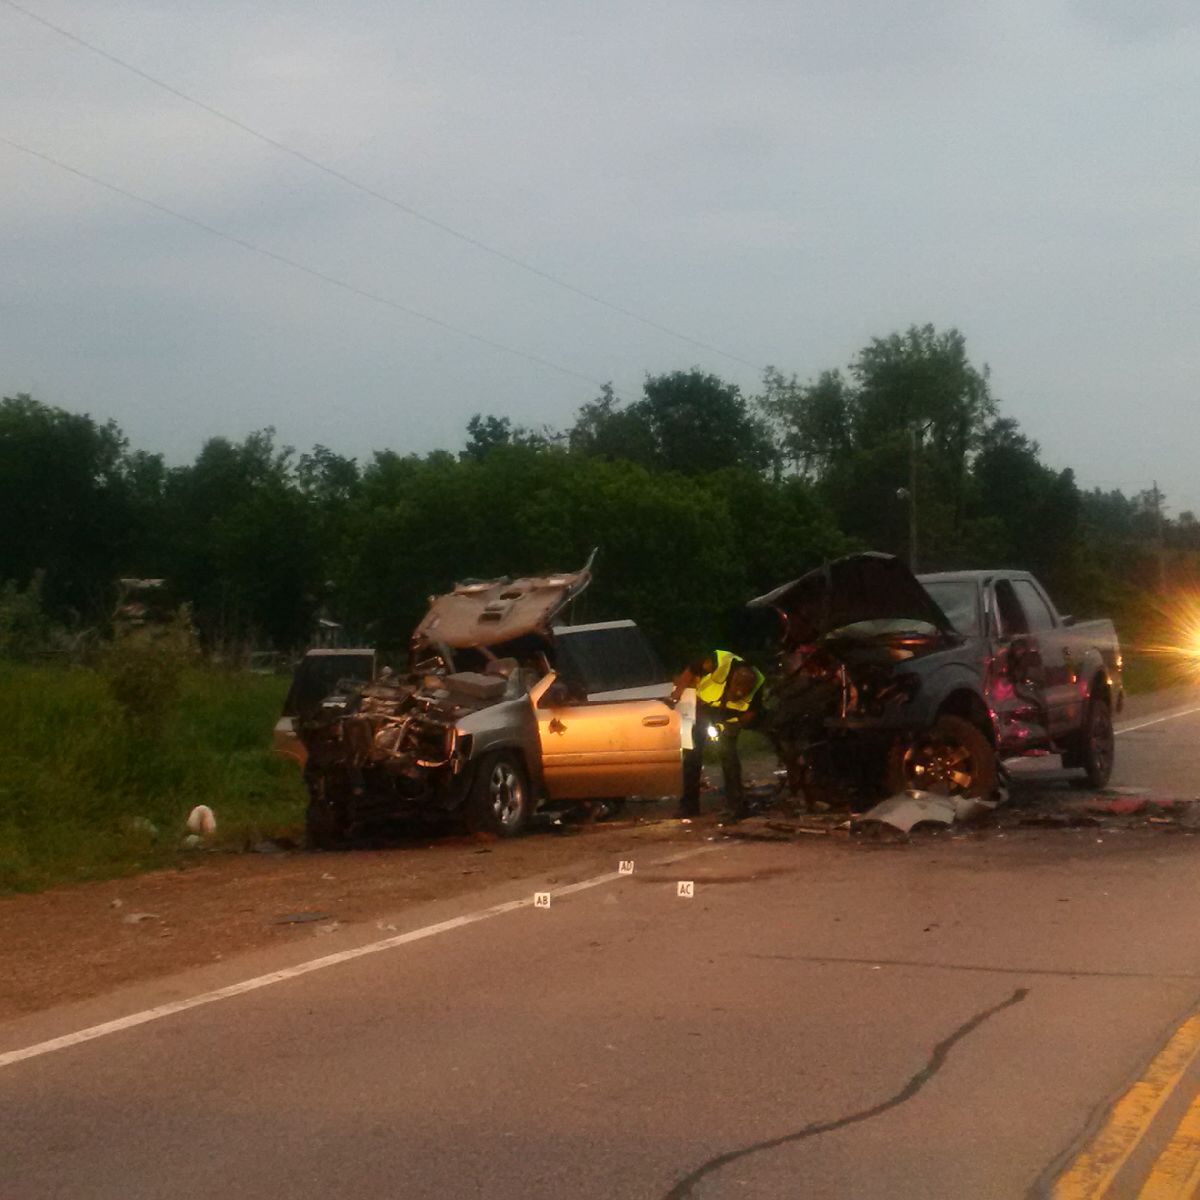 Six people have been sent to hospital following a multi-vehicle collision in New Tecumseth.